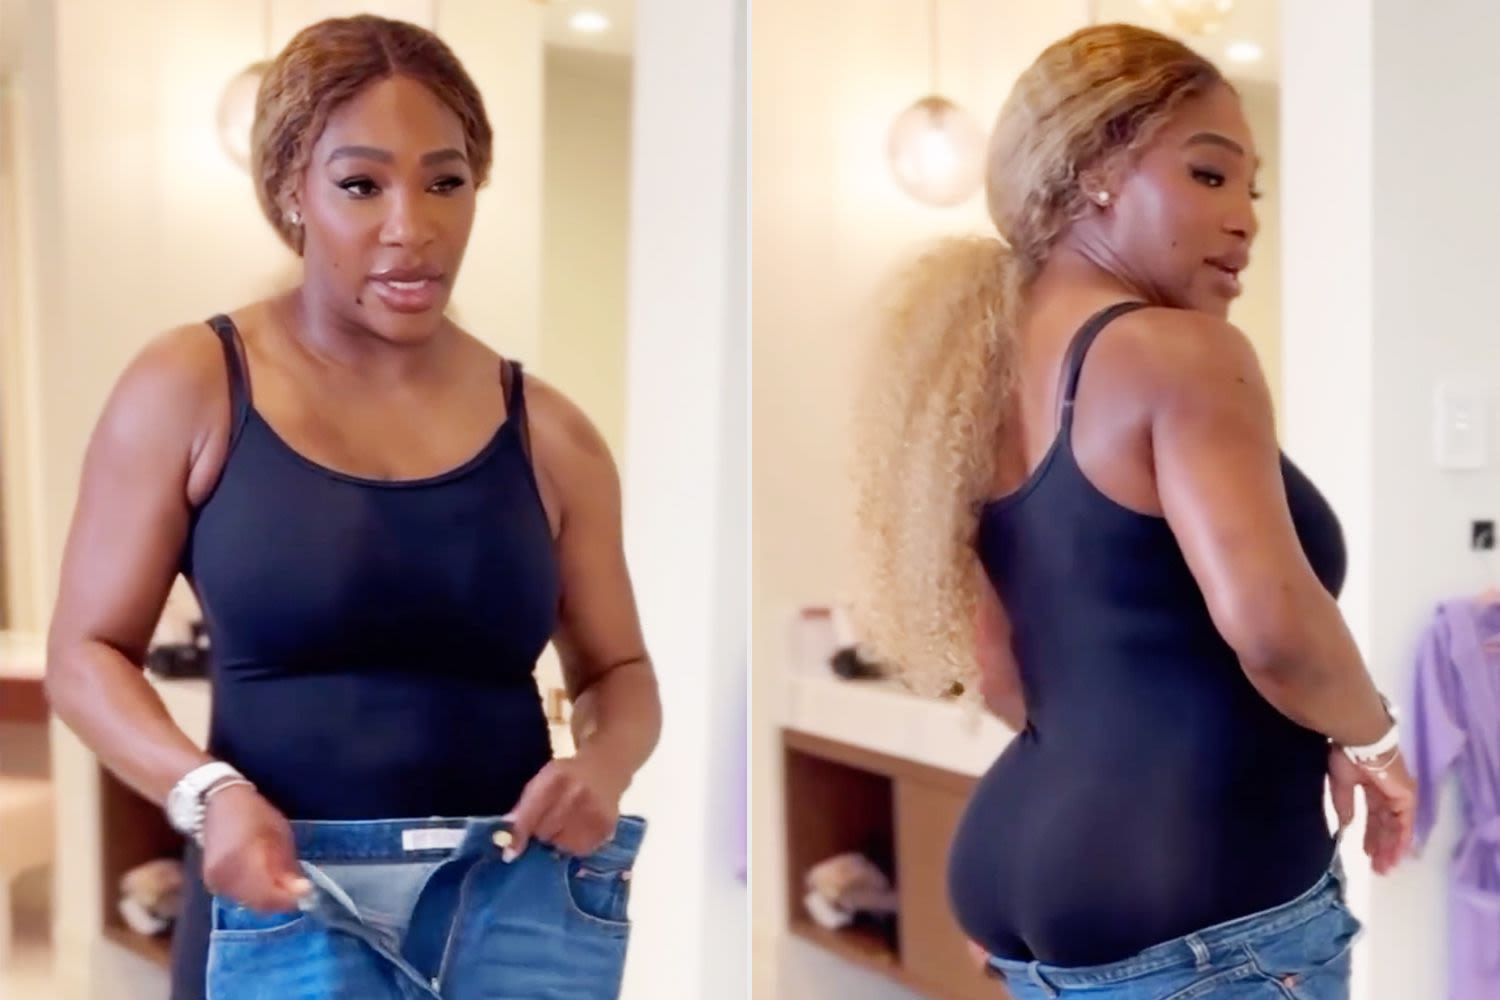 Serena Williams Tries on Valentino Denim Skirt for the 2nd Time Amid Weight Loss Journey: 'Getting There'